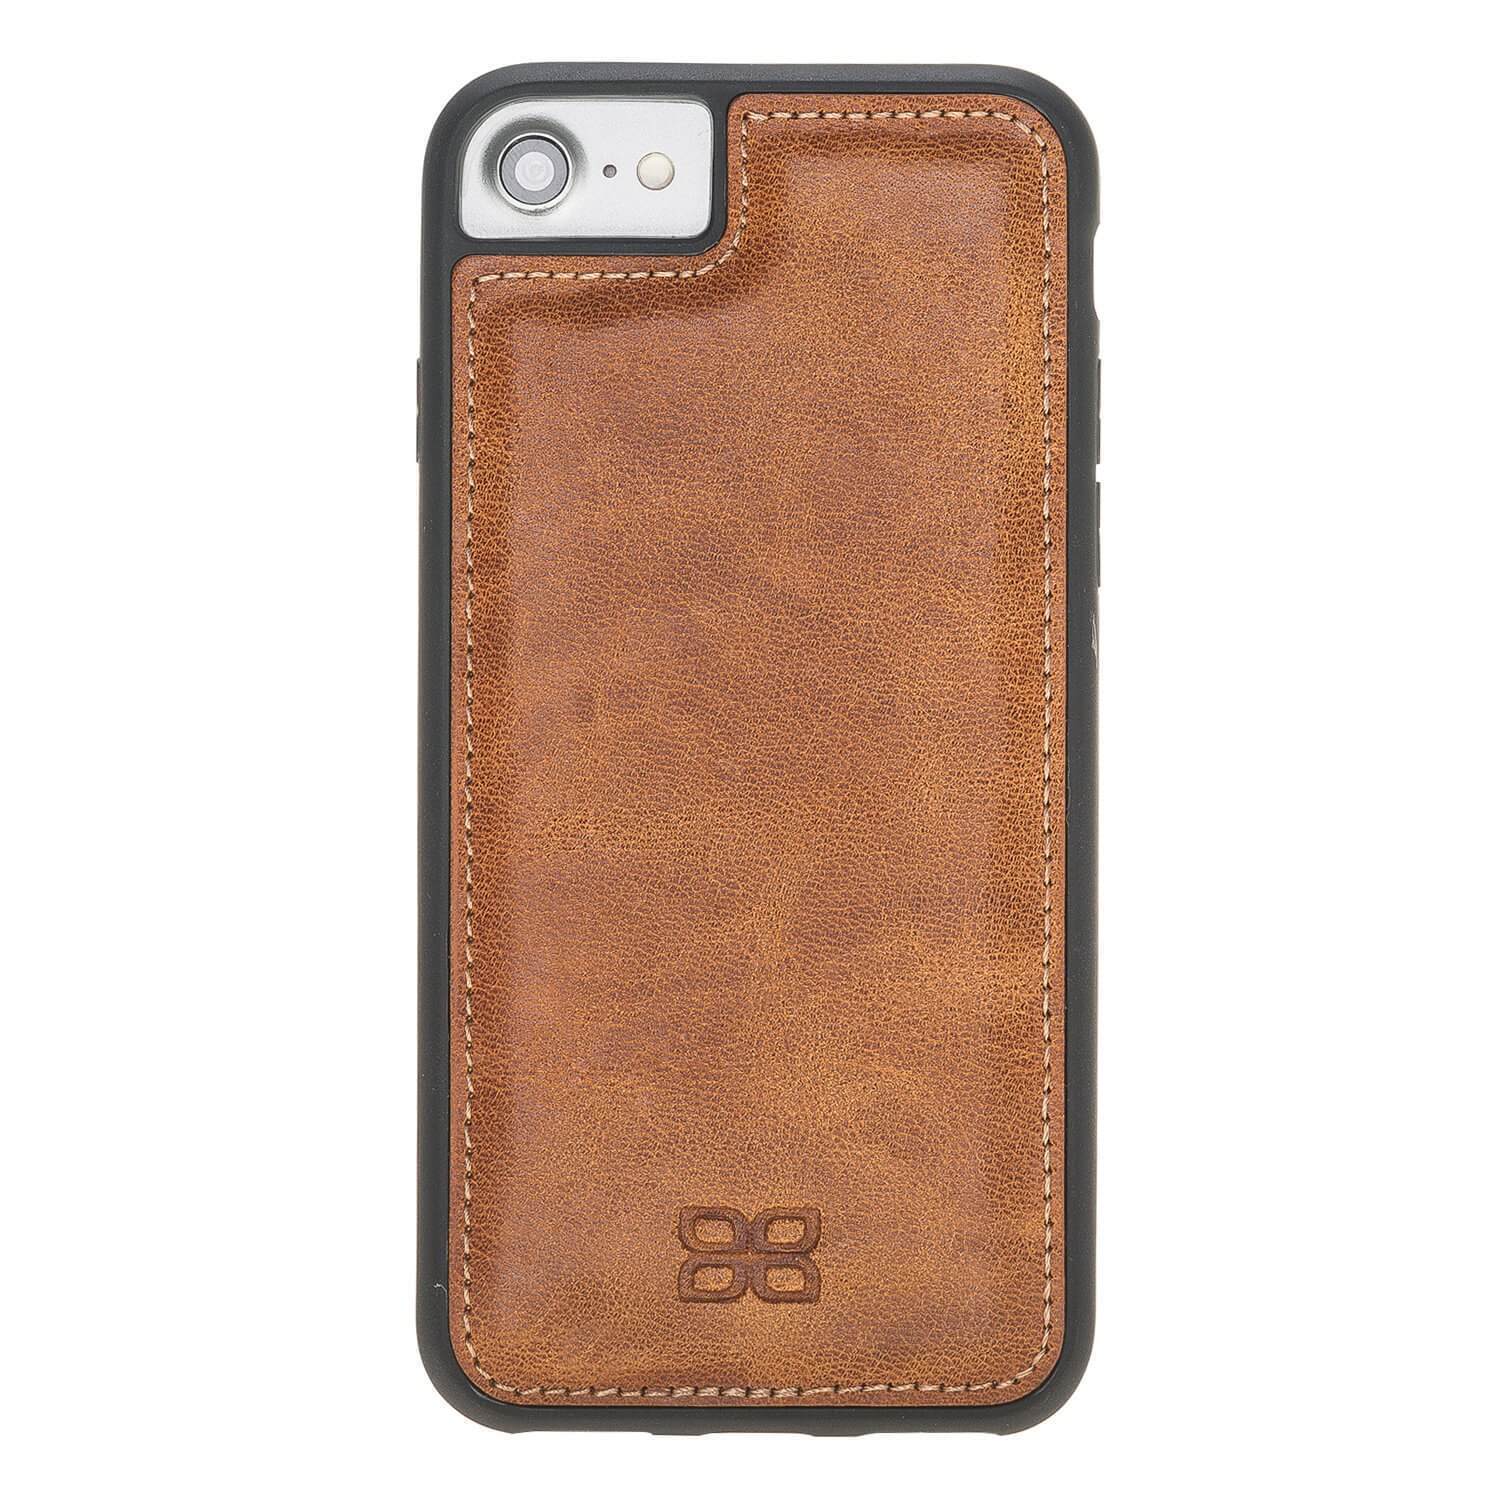 Flexible Genuine Leather Back Cover for Apple iPhone 7 Series iPhone 7 / Vegetal Tan Bouletta